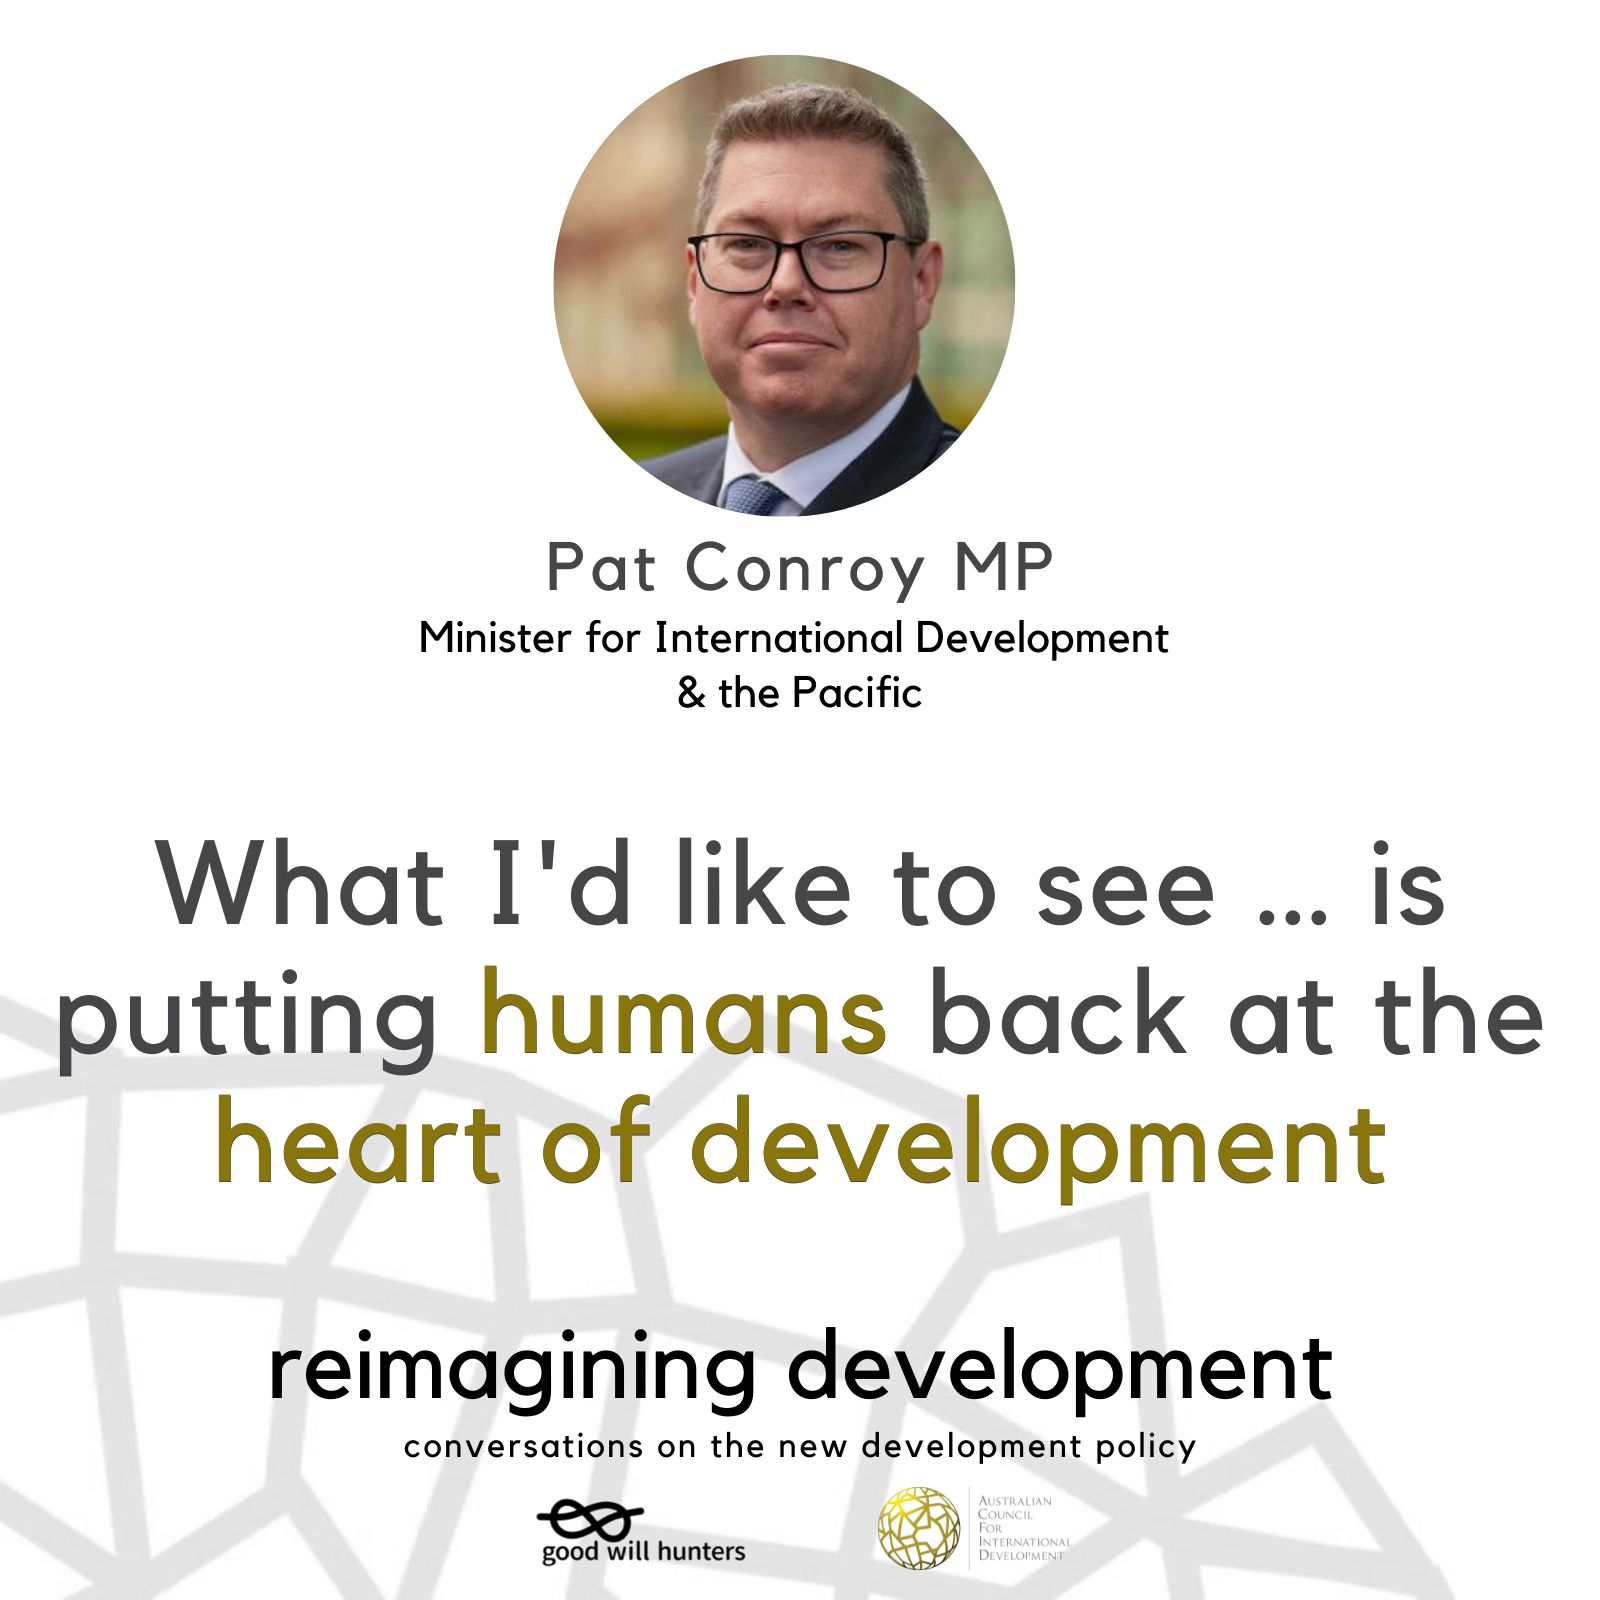 the Hon Pat Conroy MP: What I'd like to see is... putting humans back at the heart of development'